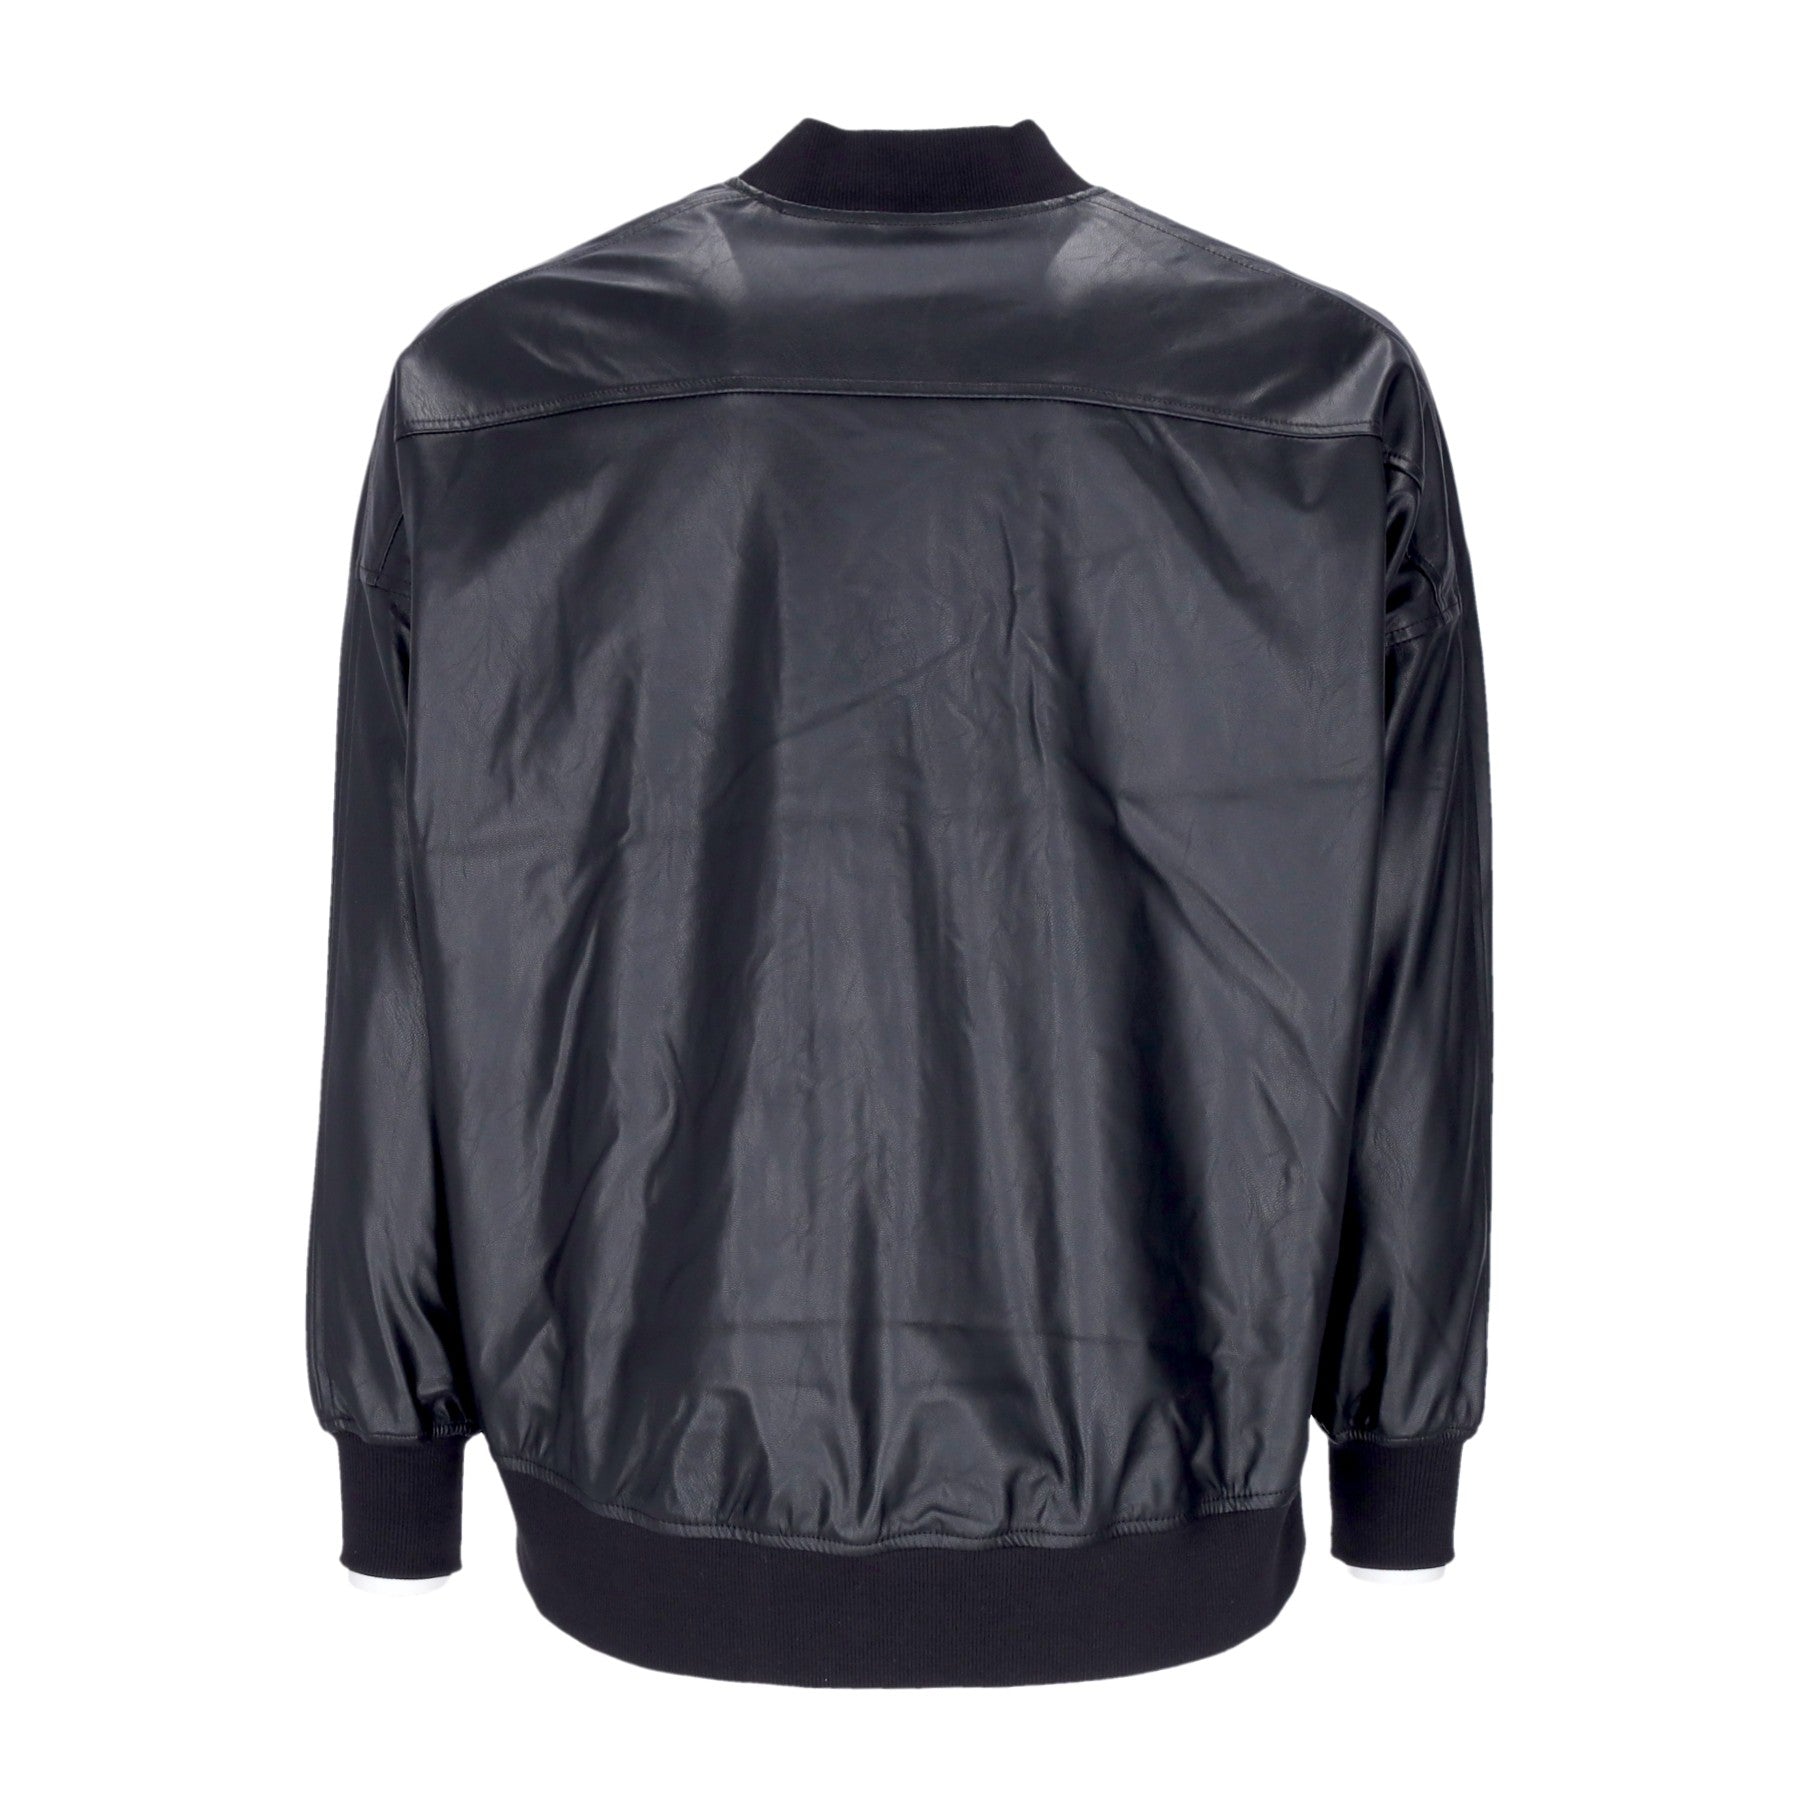 Puma, Giubbotto Donna T7 Oversized Faux Leather Bomber, 